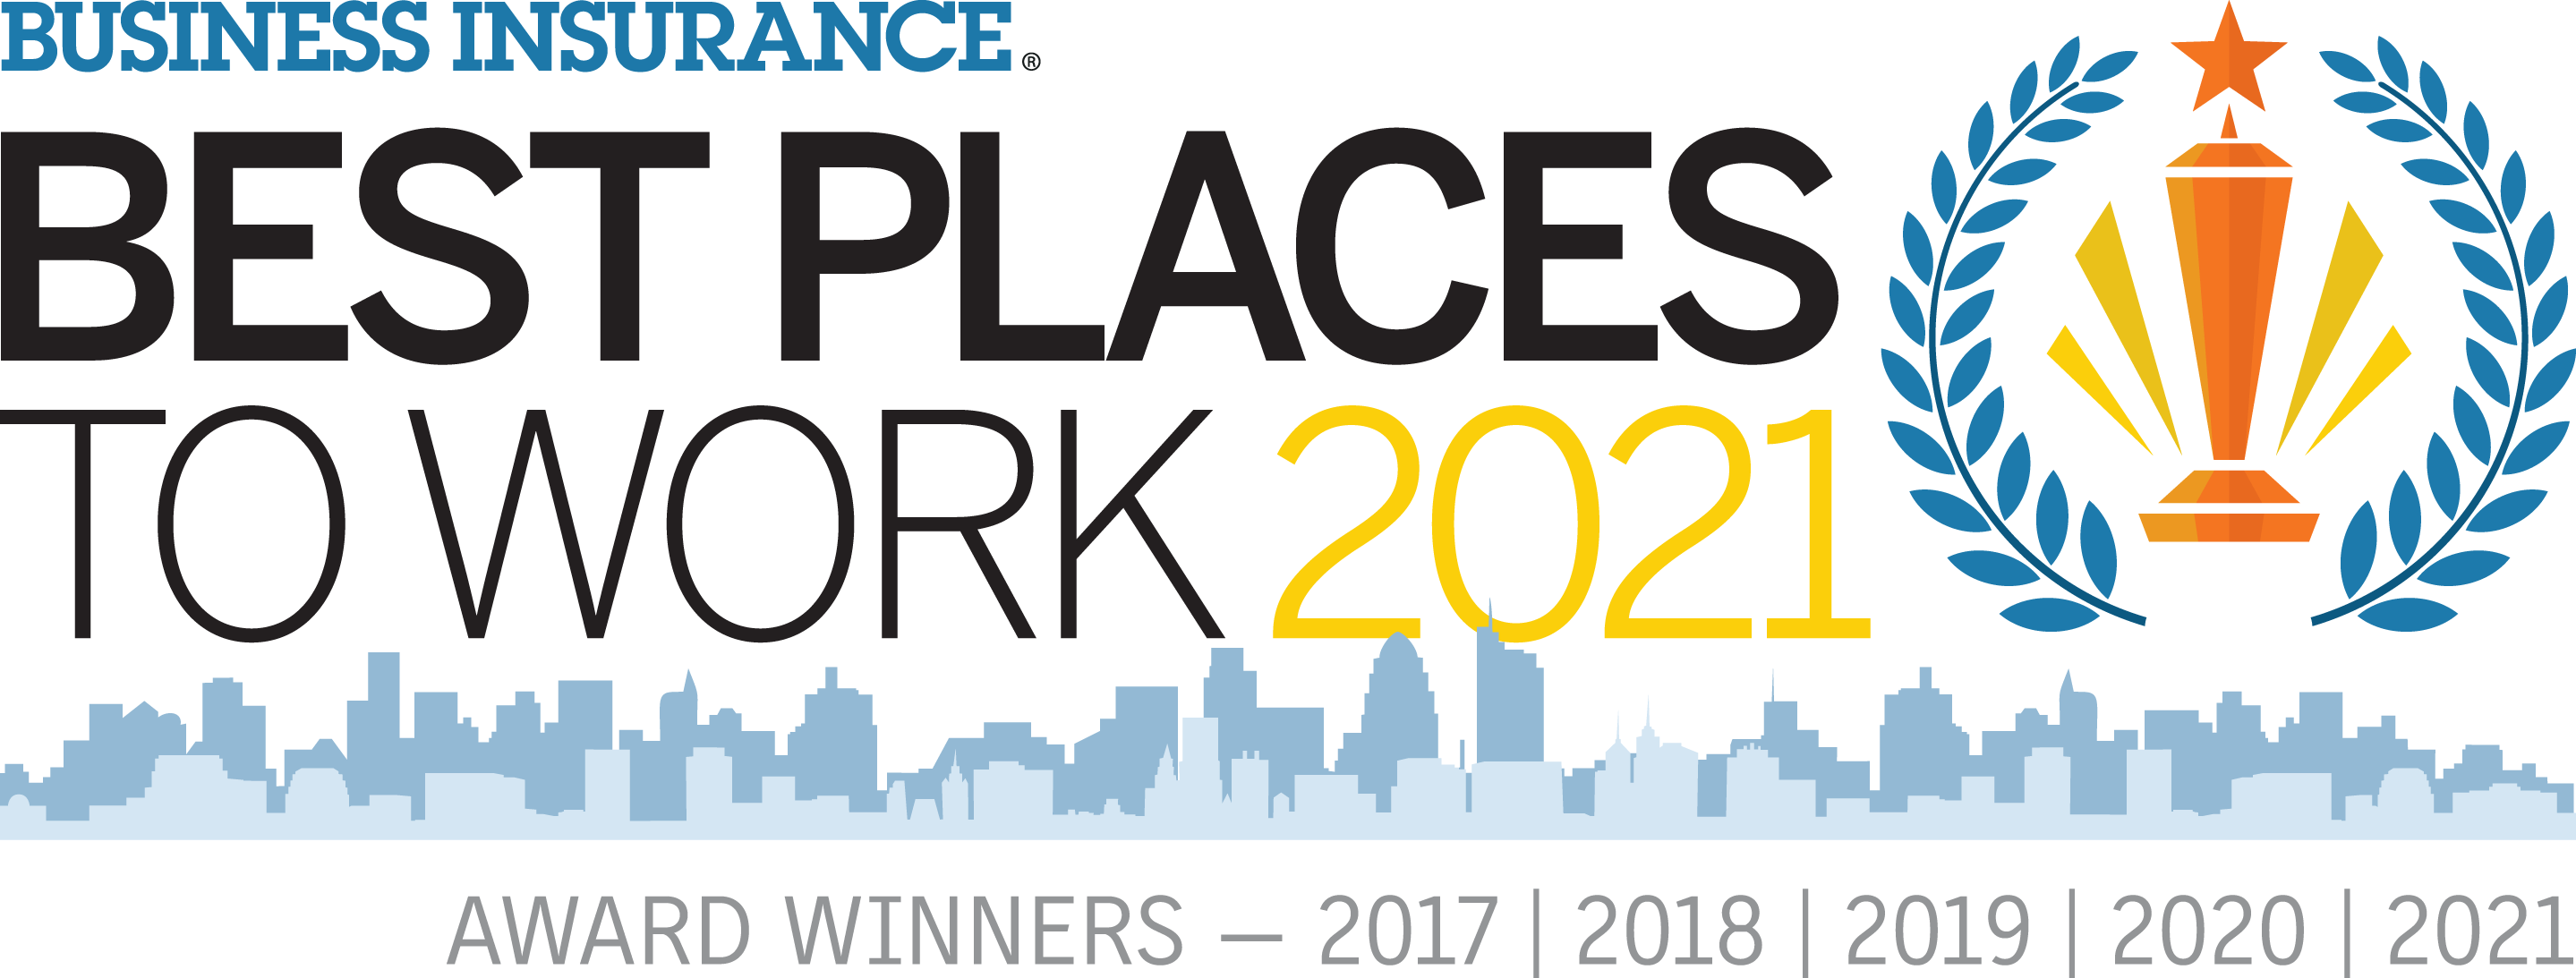 Best Insurance, Best Place to work 2020 award image